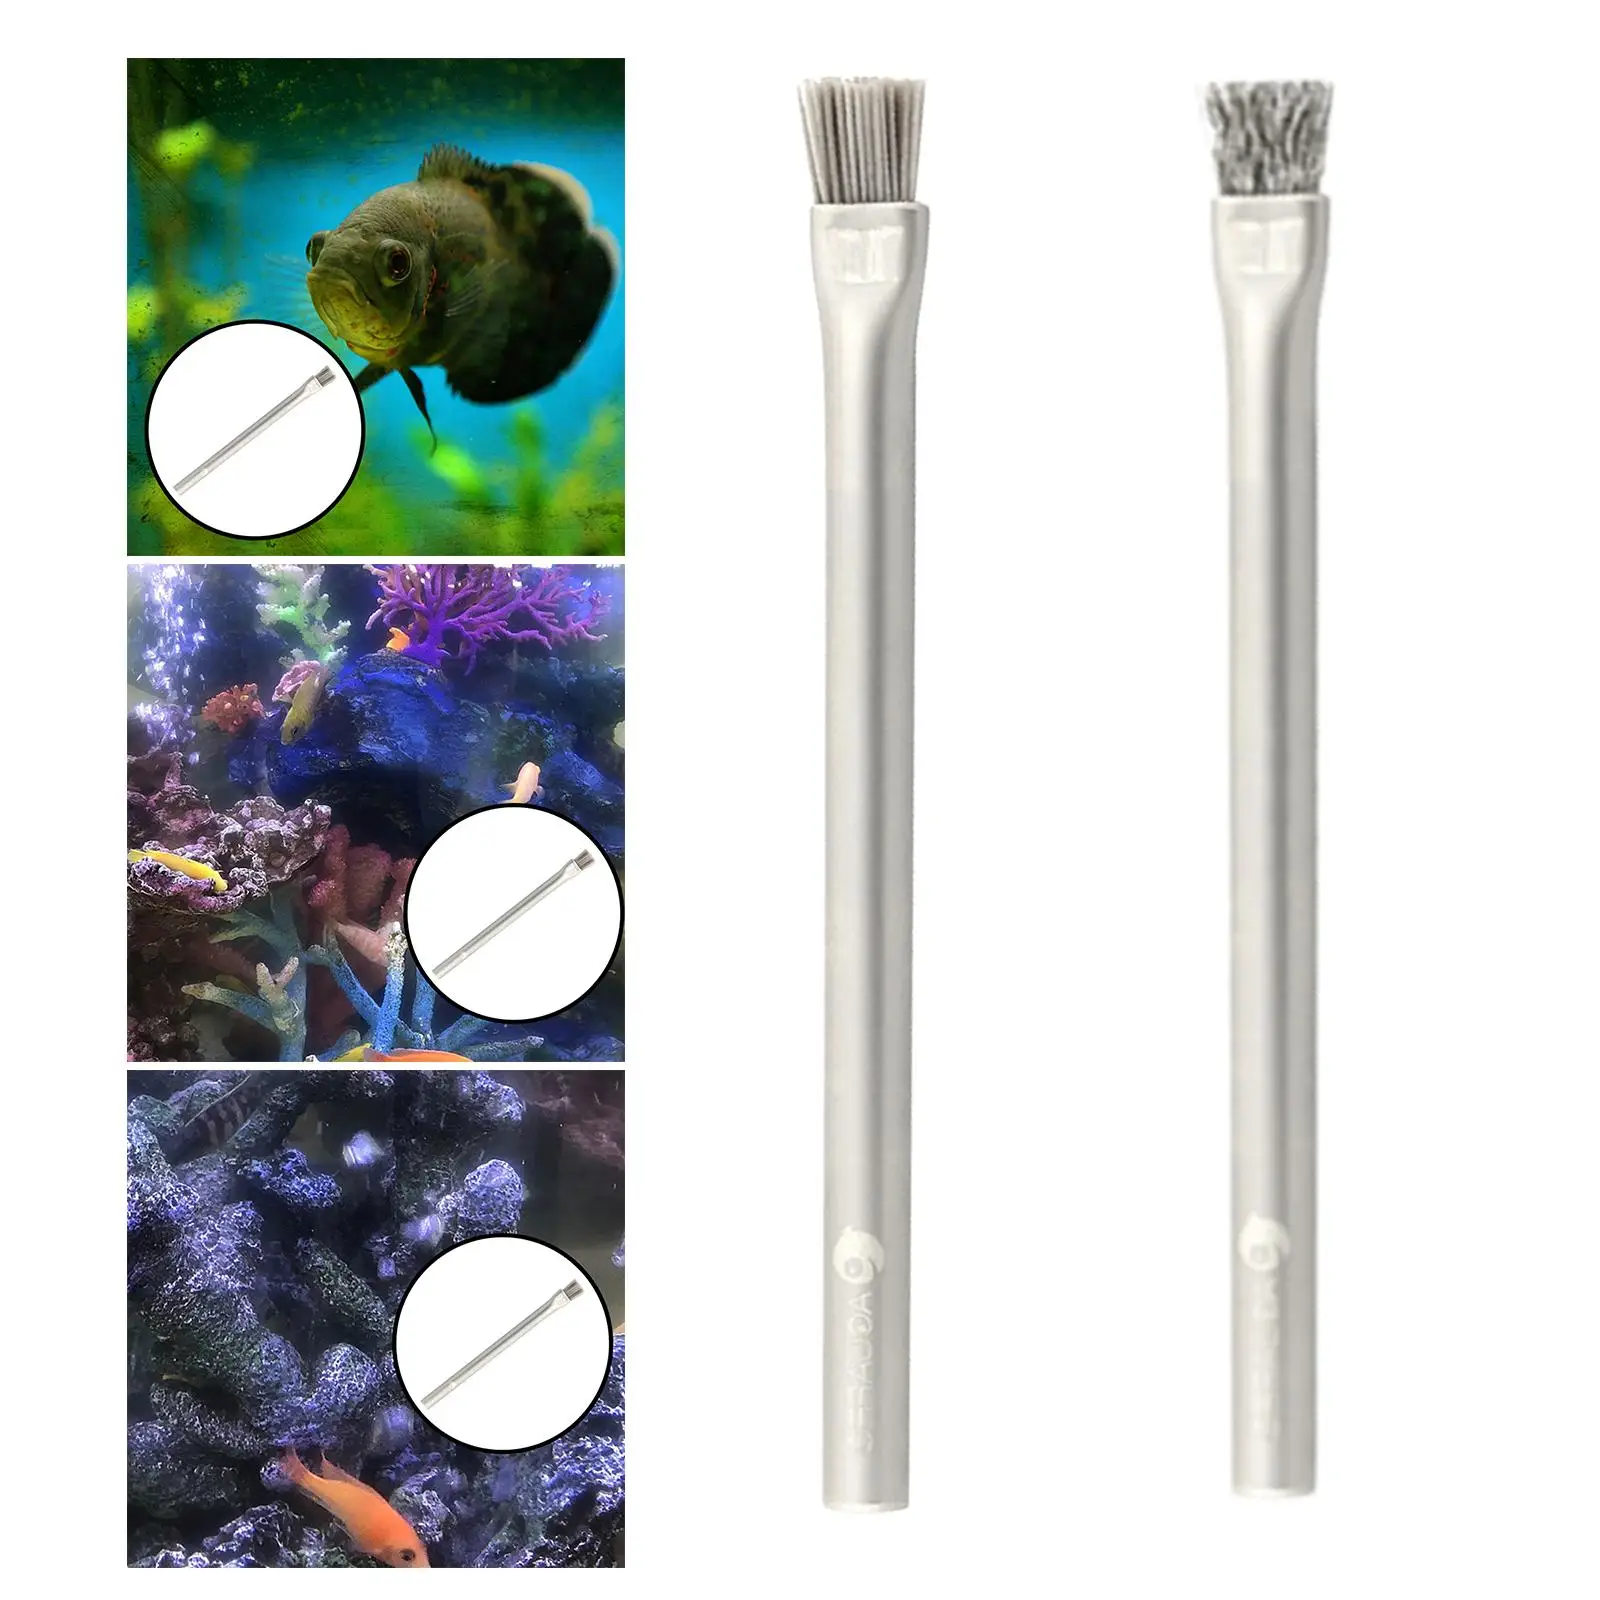 Fish Tanks Algae Cleaning Brush Scrubber Aquarium Cleaning Tools Fish Tanks Glass Cleaner Remover for Pond Landscaping Stone